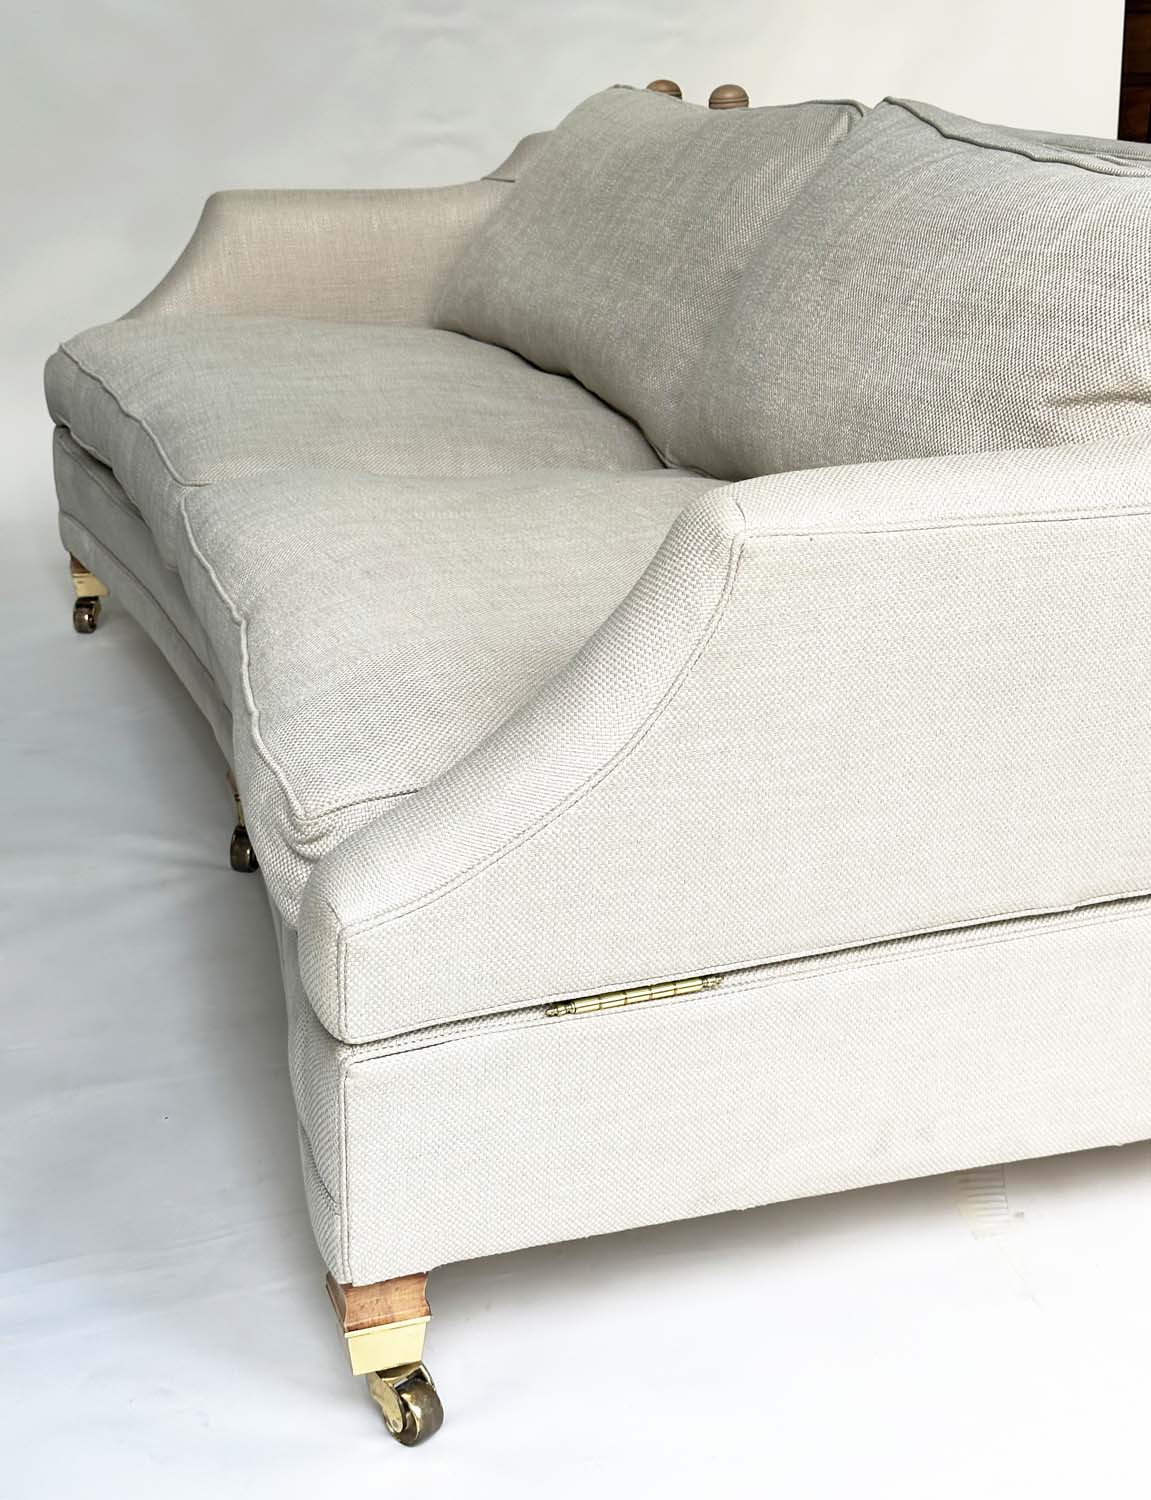 KNOLL SOFA BY DURESTA, grey linen upholstered with down swept arms, feather filled cushions and - Image 9 of 14